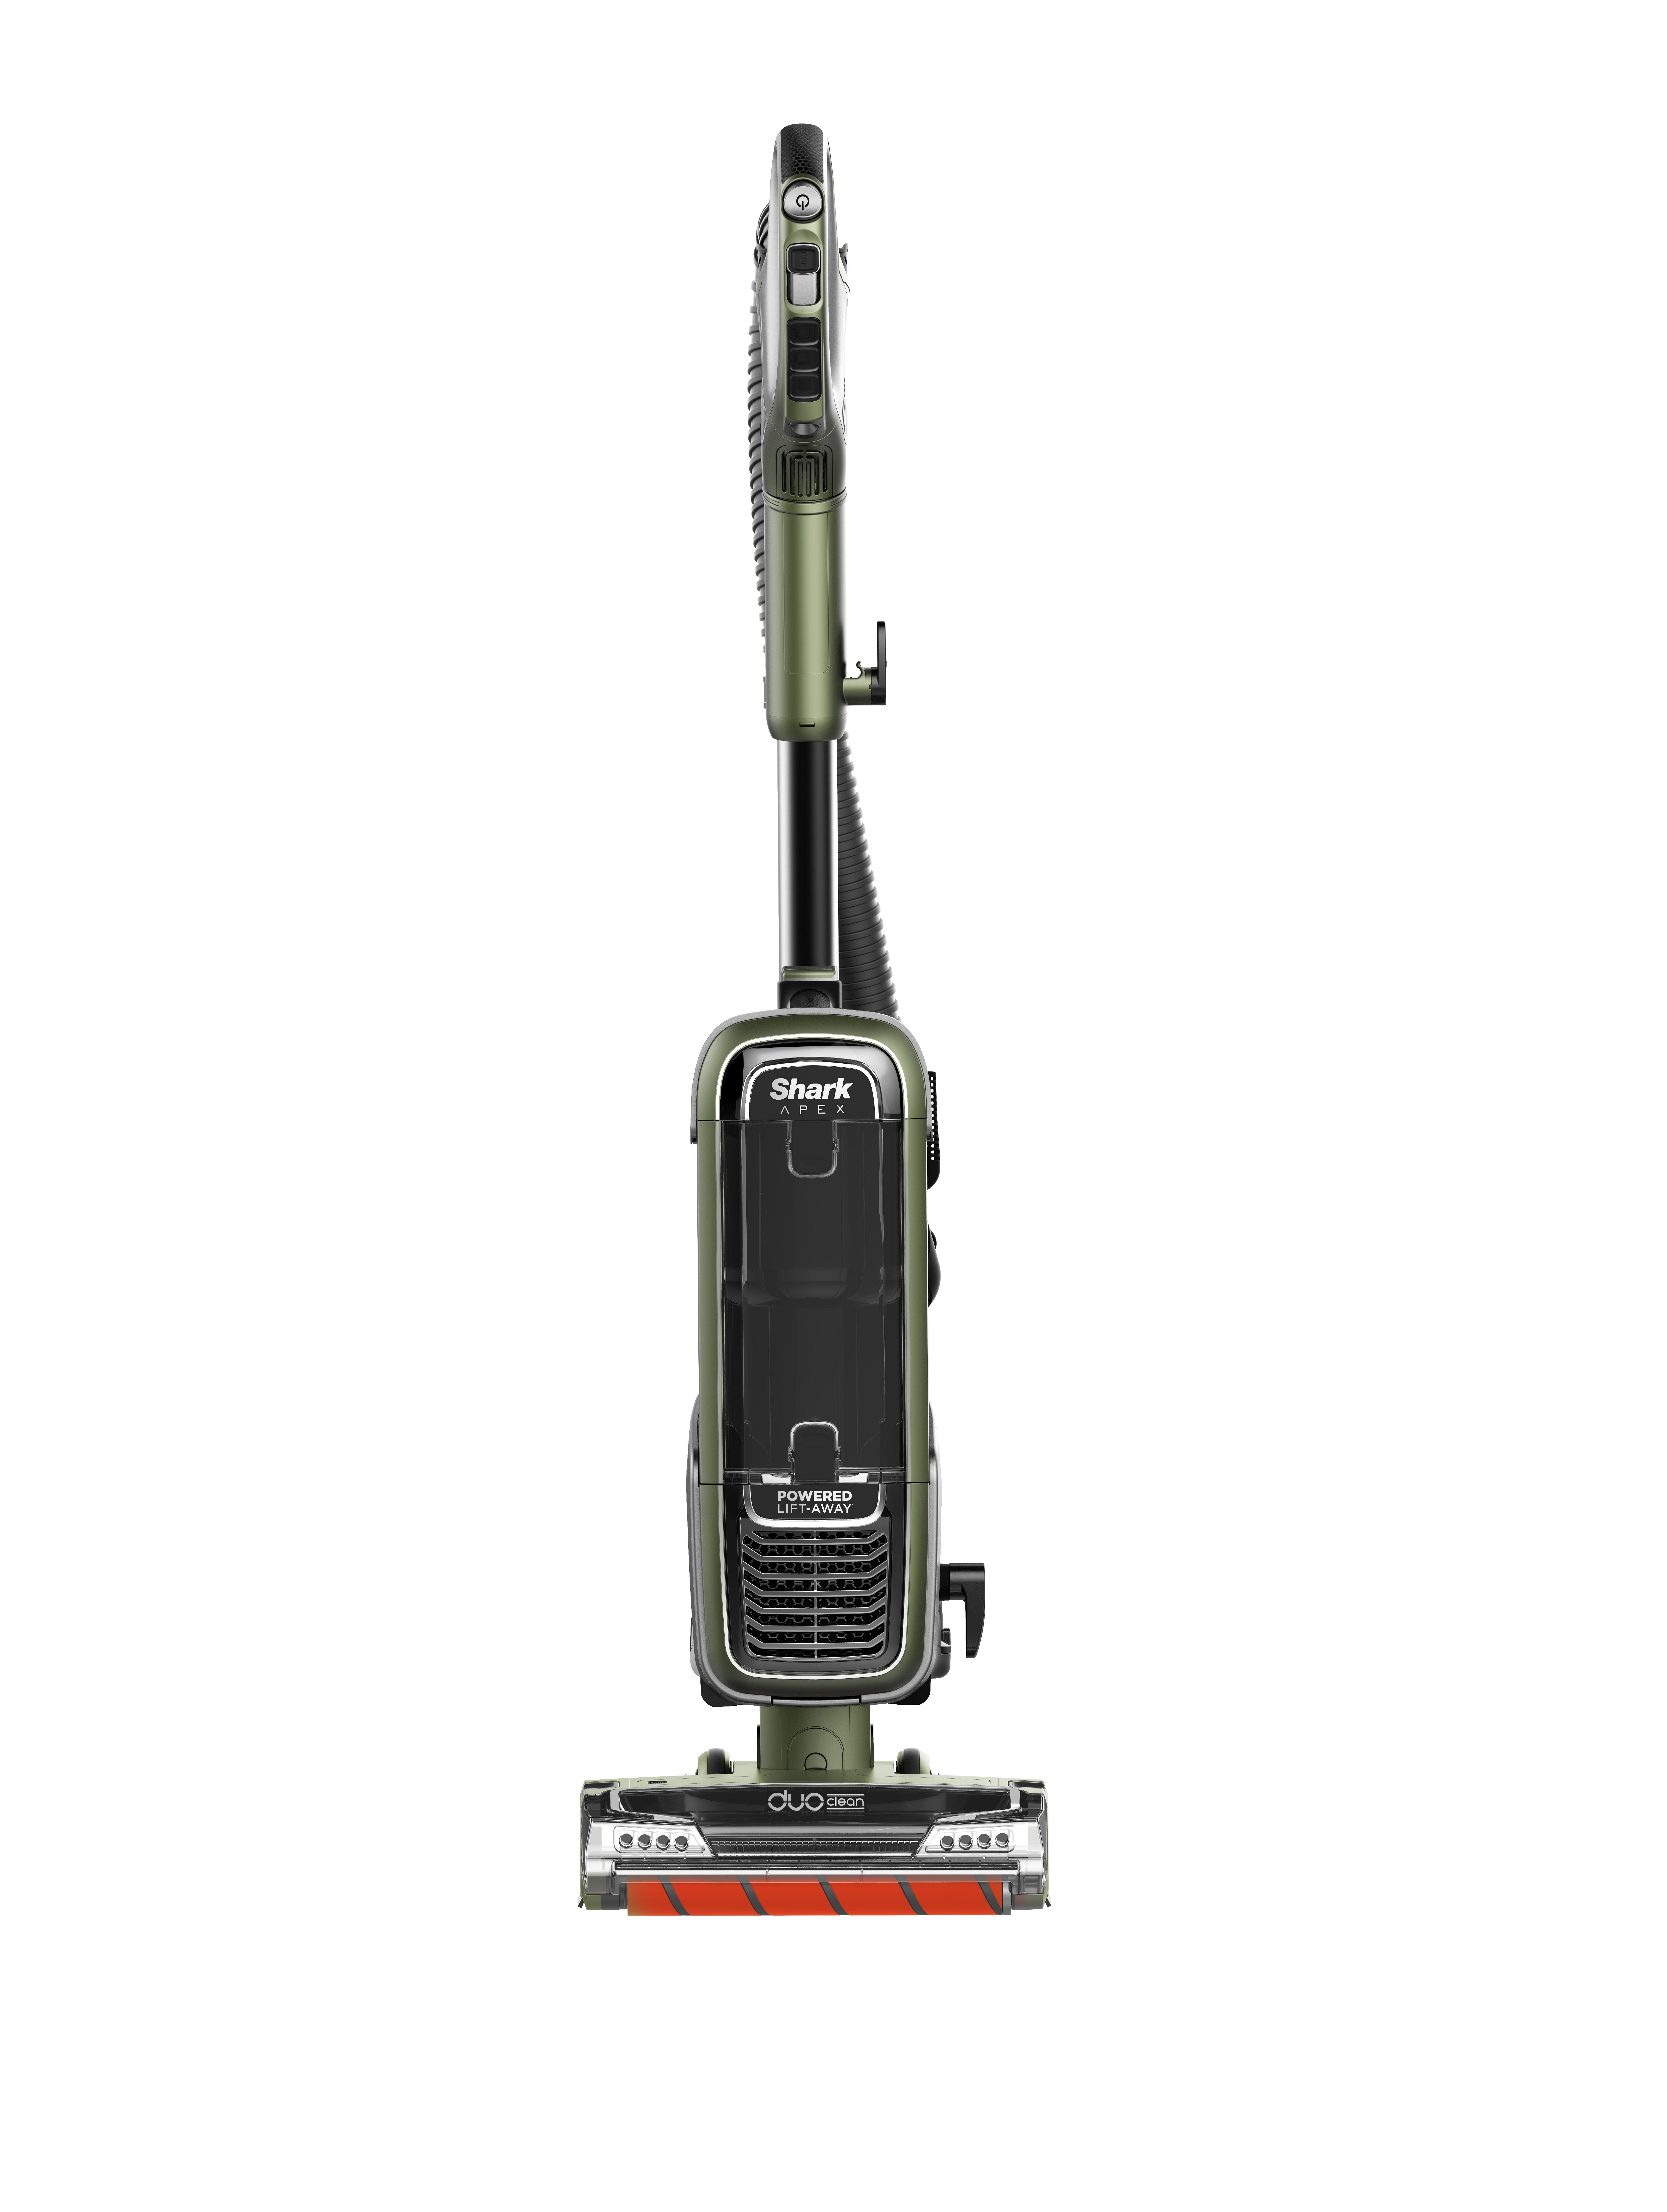 Shark APEX Duo Clean with Self-Cleaning Brush Roll Powered Lift-Away Upright Vacuum, AZ1000 - image 1 of 12